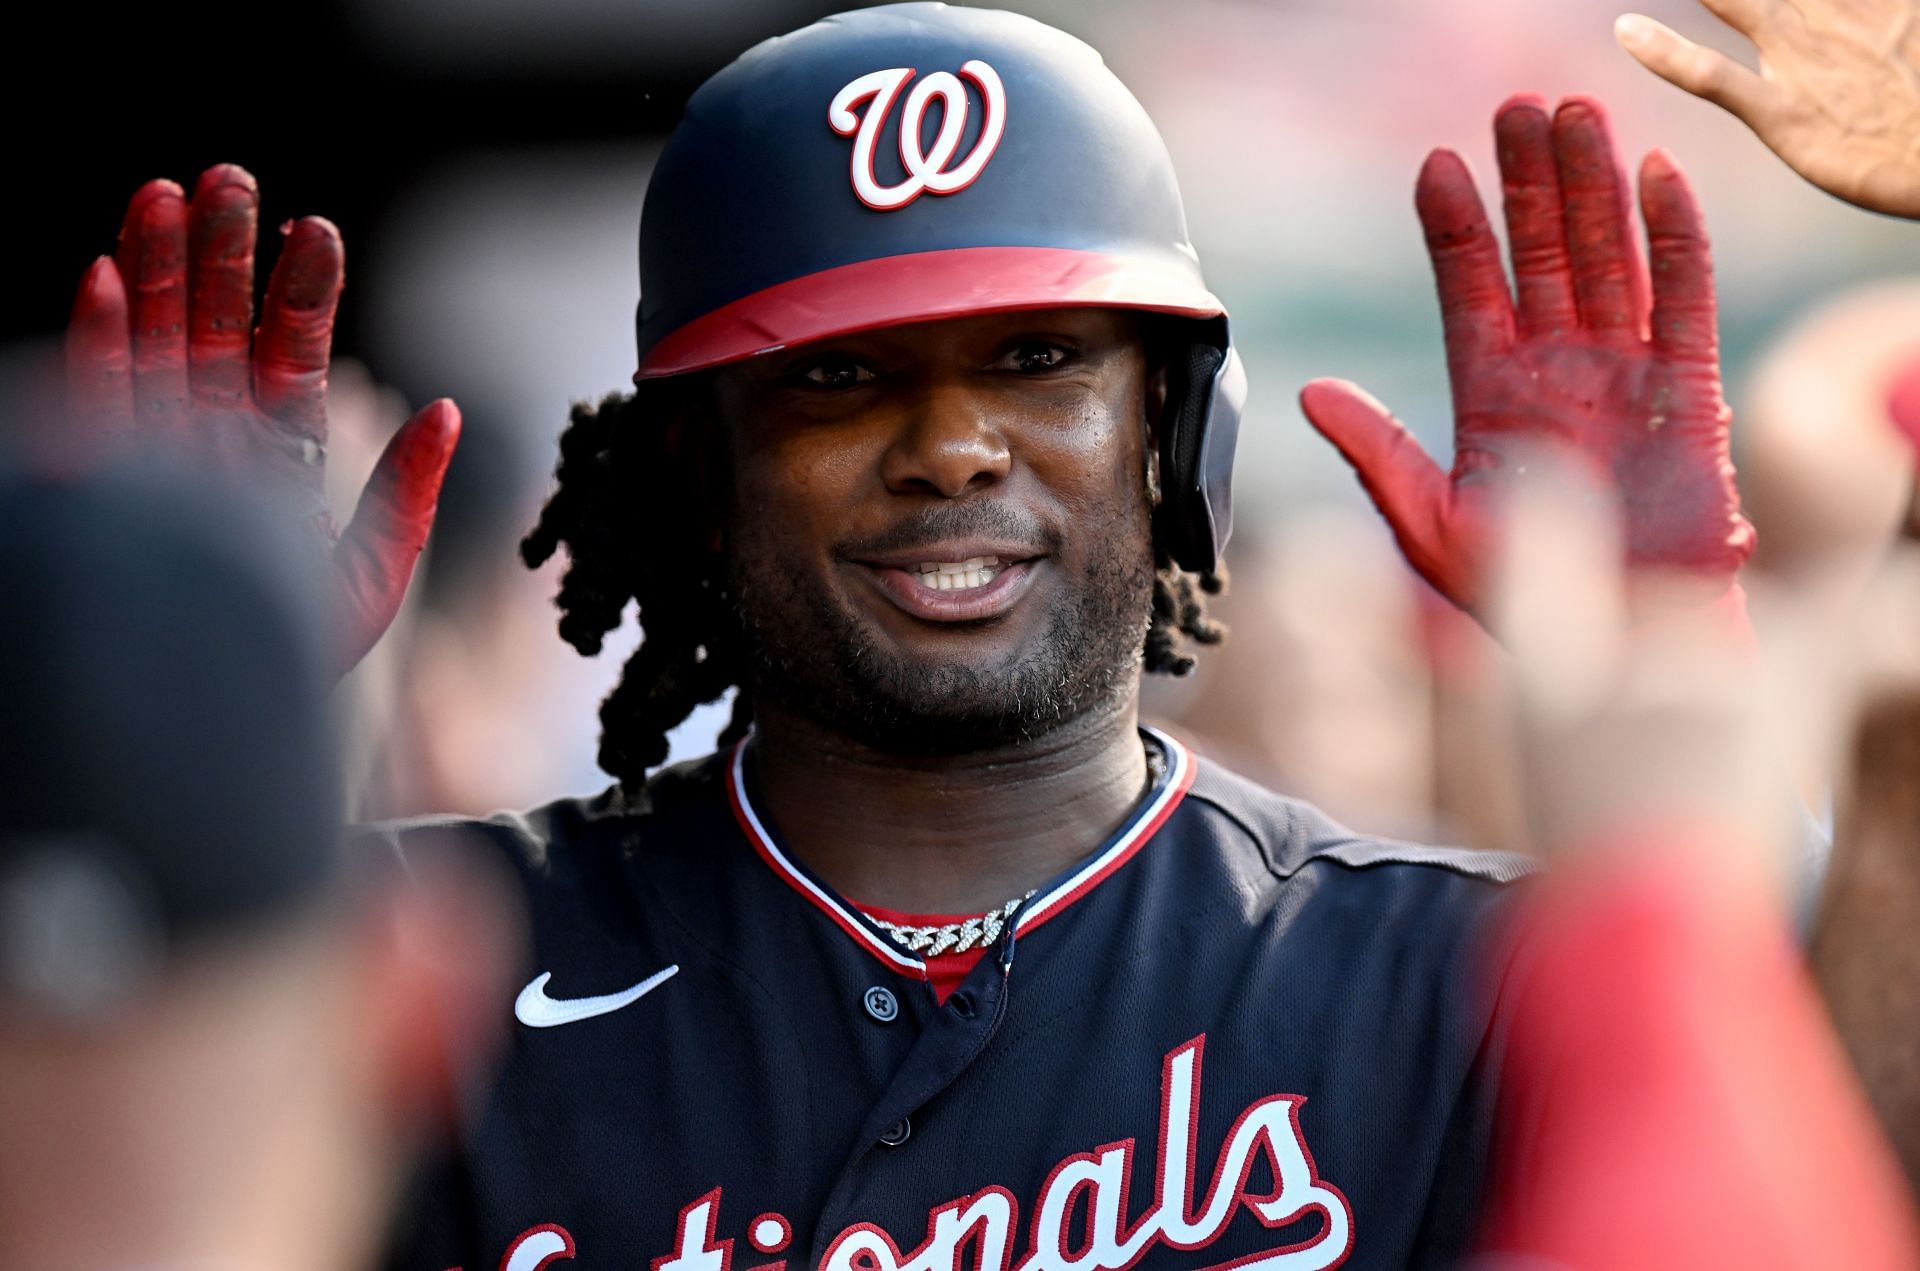 Washington Nationals slugger Josh Bell has five RBIs today over the course of the doubleheader against the Philadelphia Phillies